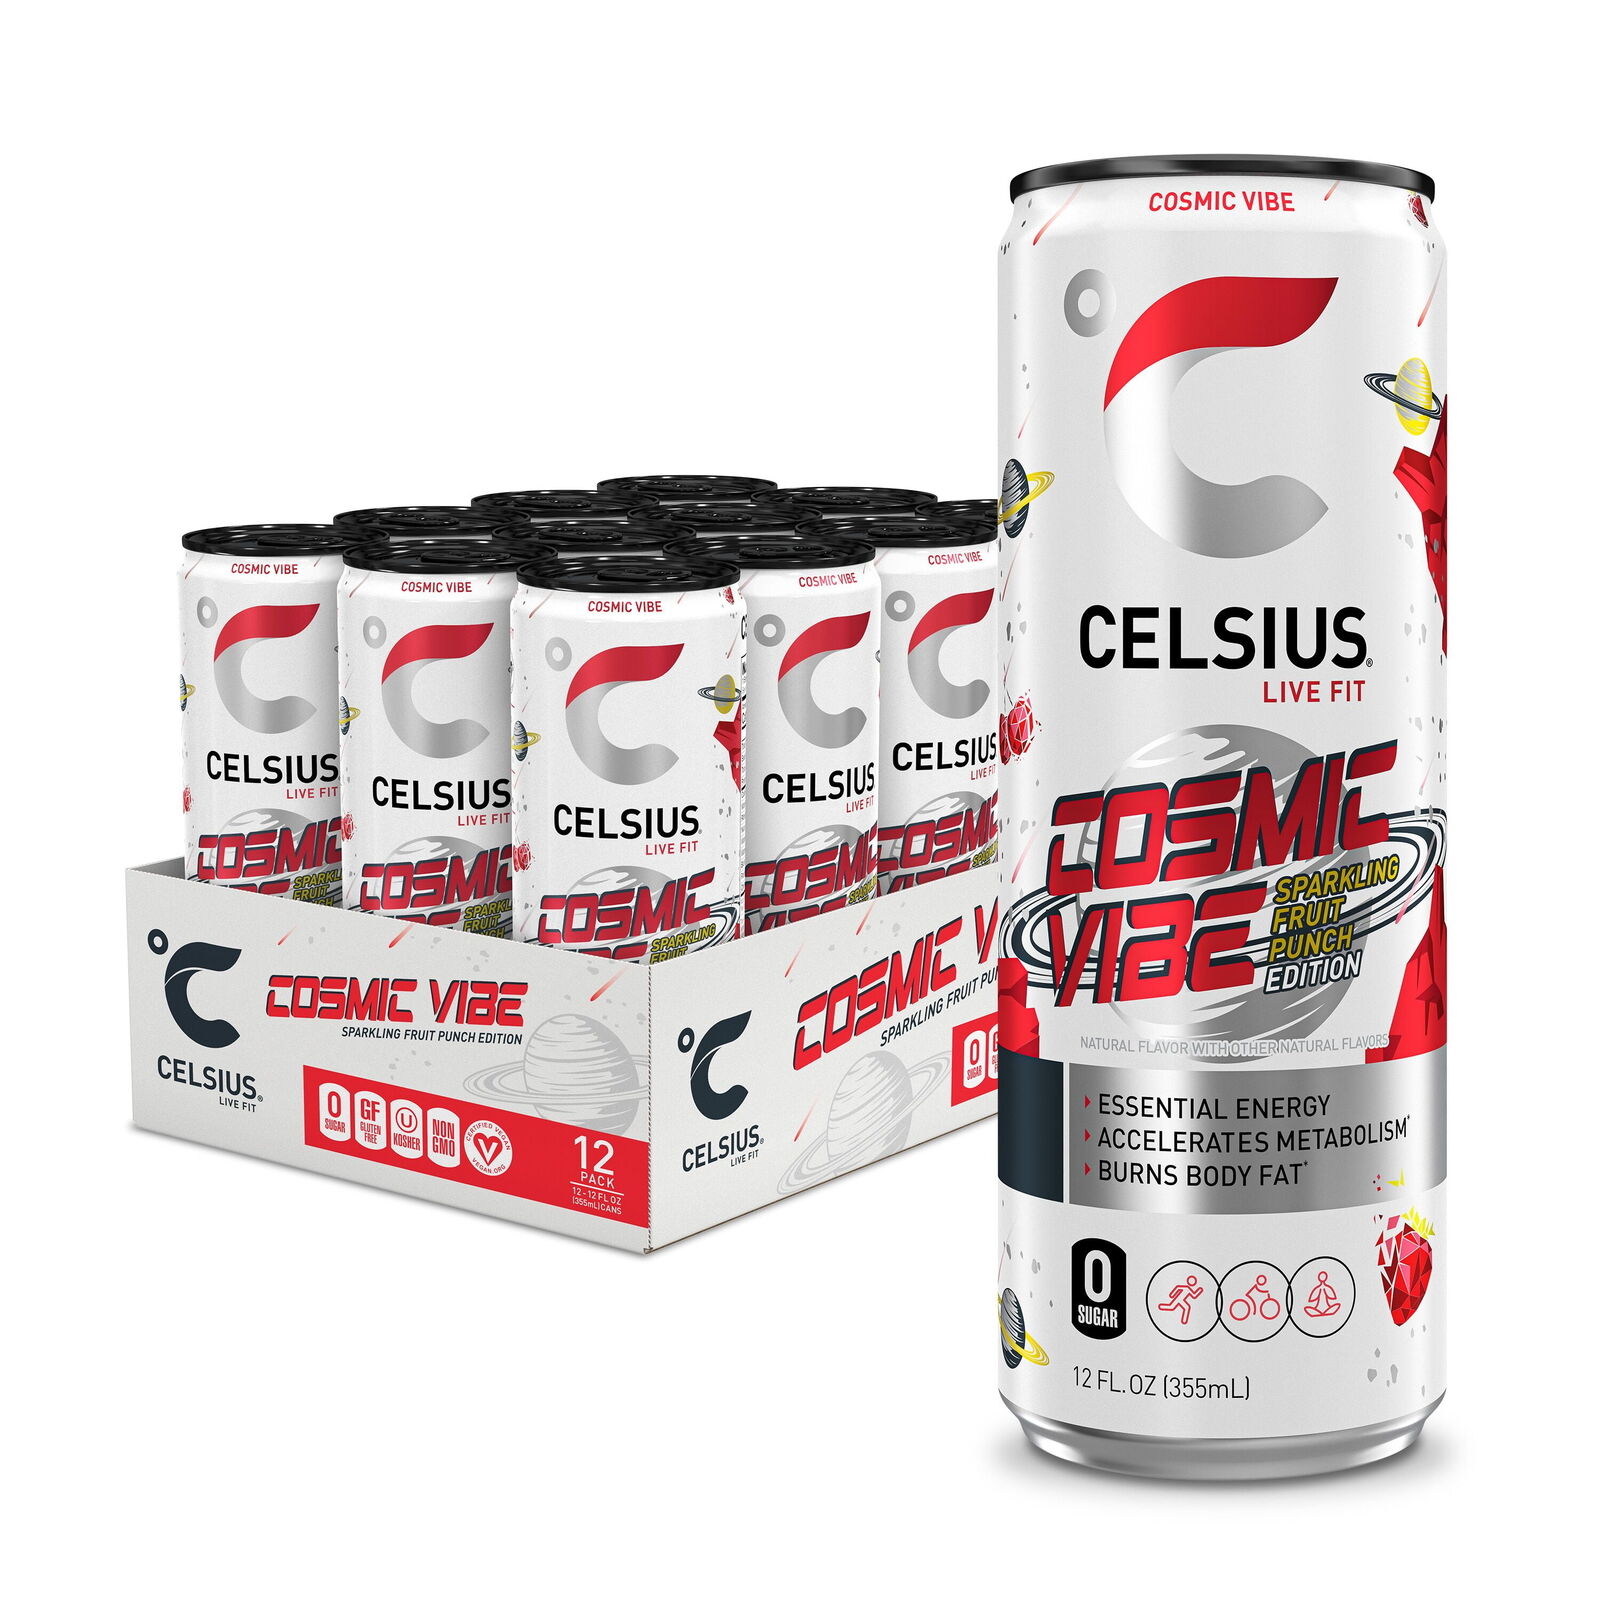 CELSIUS Sparkling Cosmic Vibe, Functional Essential Energy Drink 12 fl oz Can